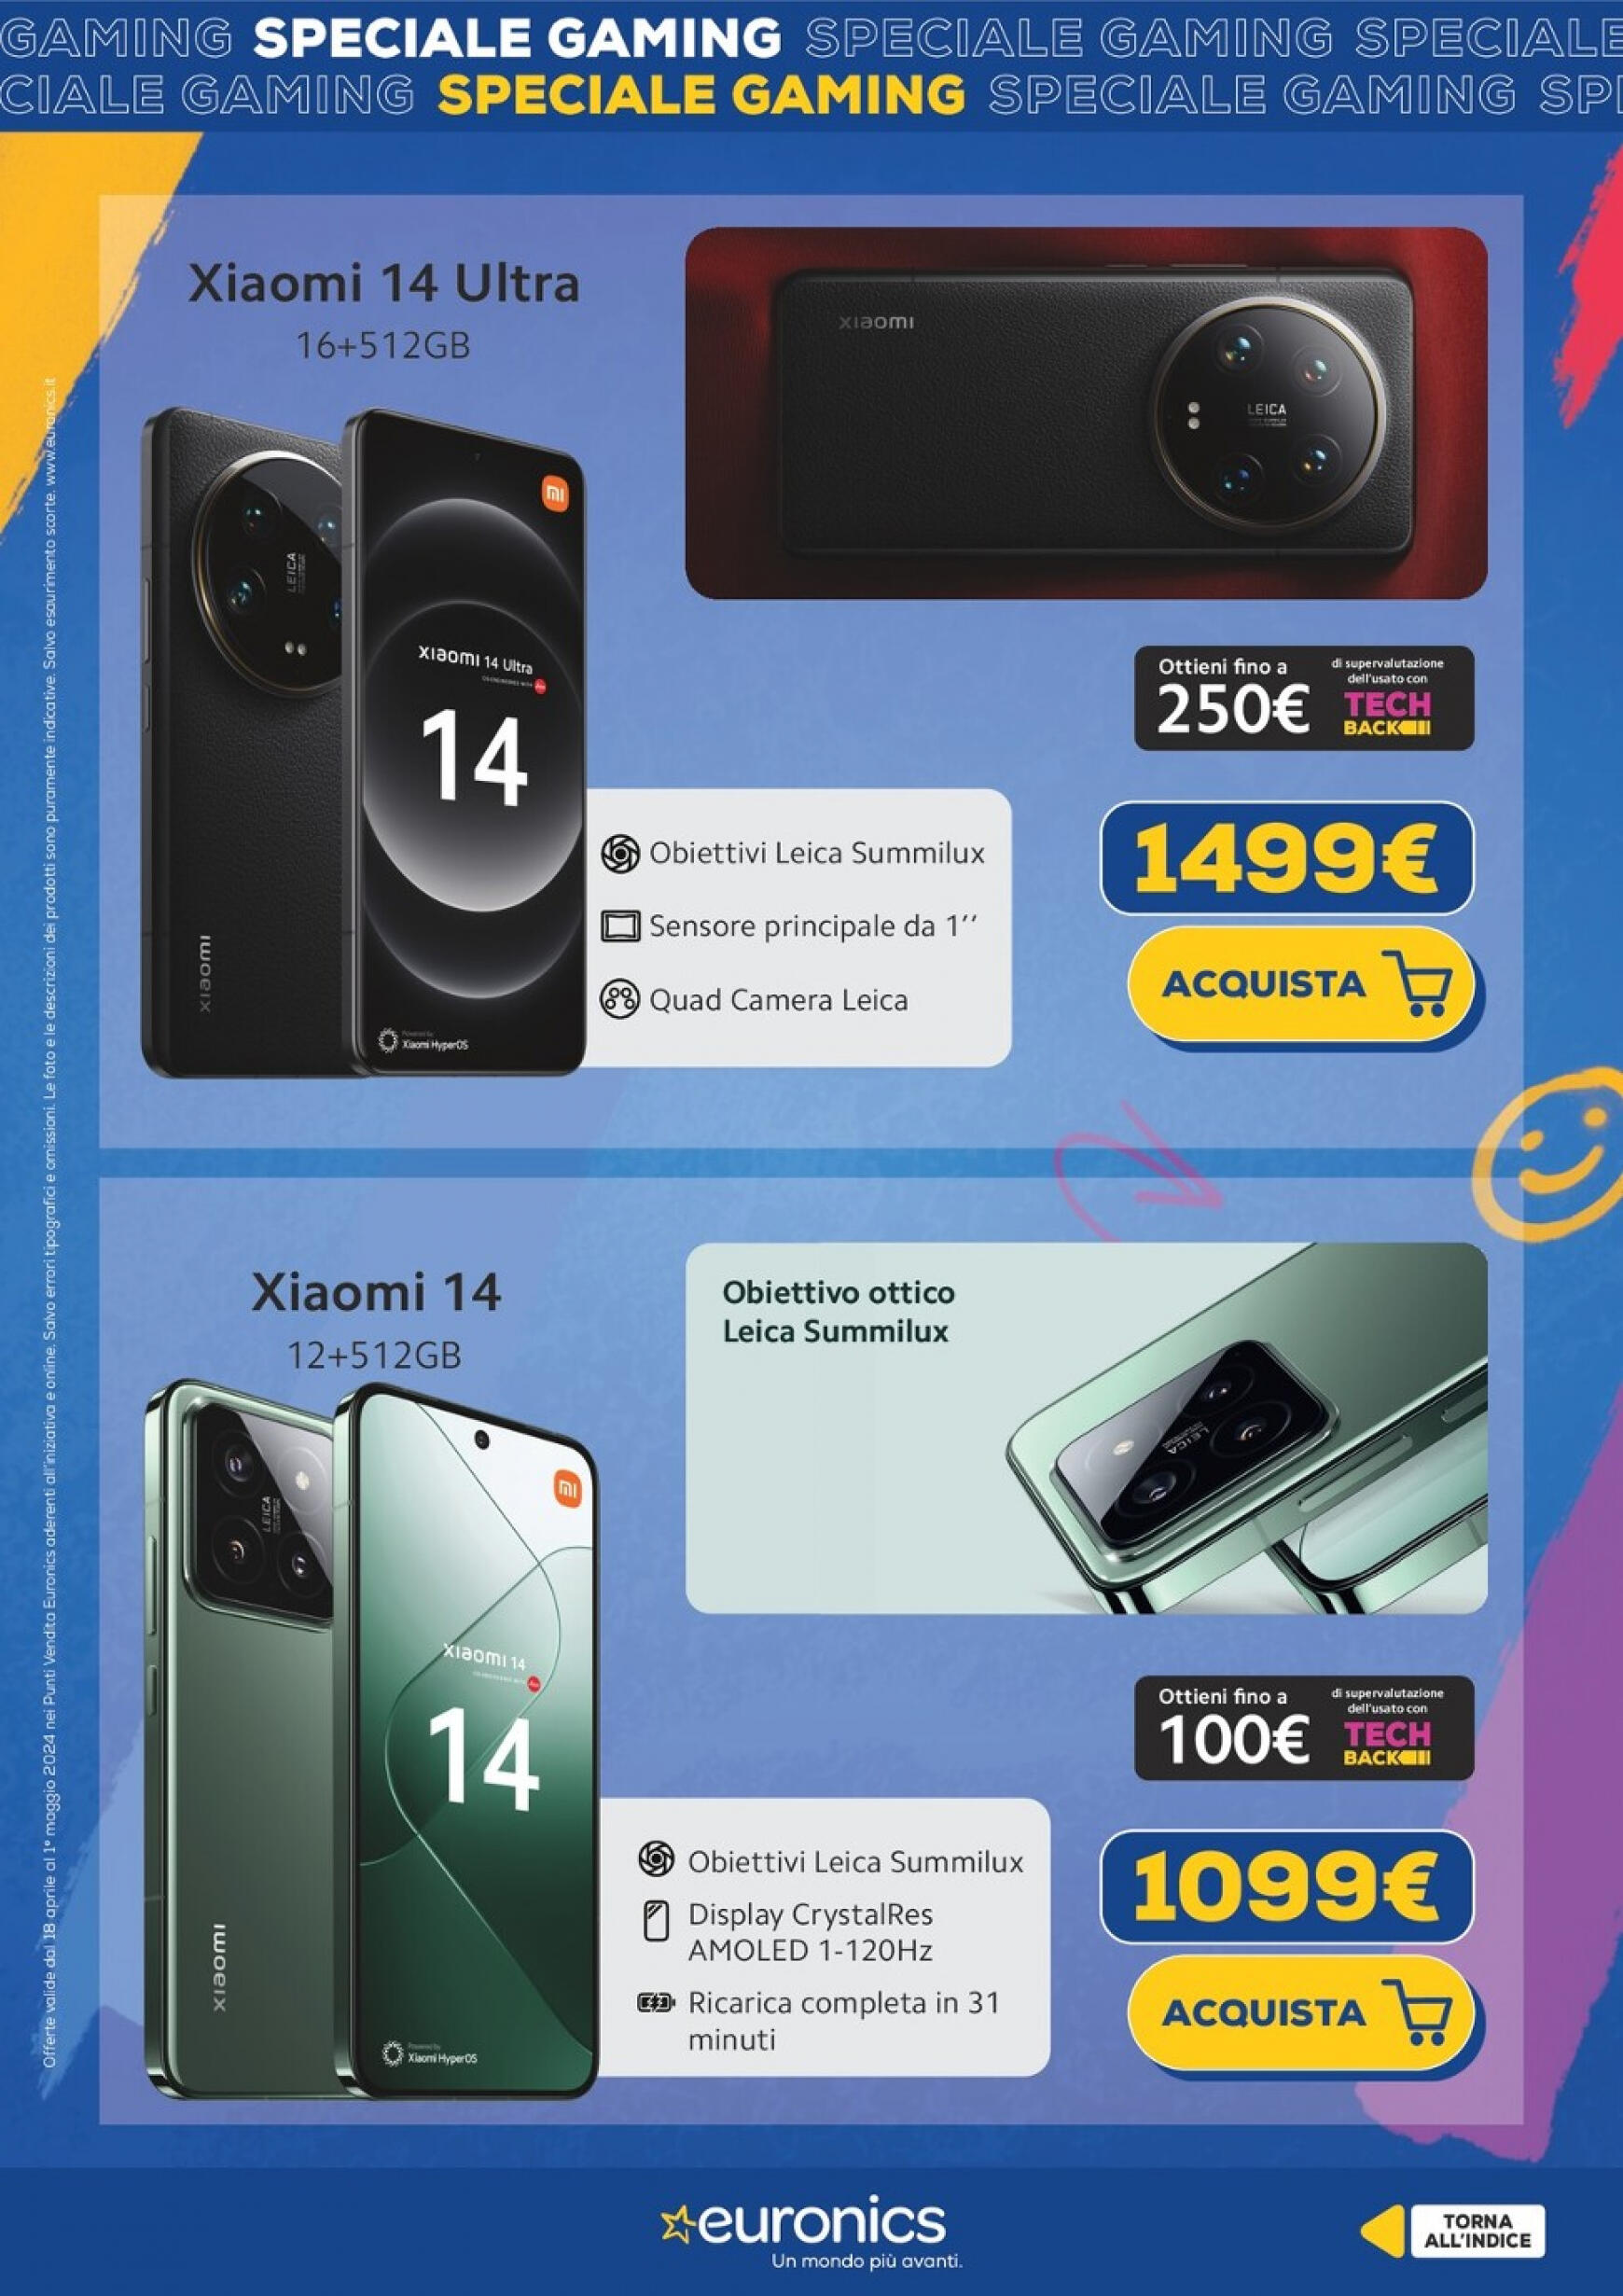 euronics - Nuovo volantino Euronics - Speciale Gaming 18.04. - 01.05. - page: 21